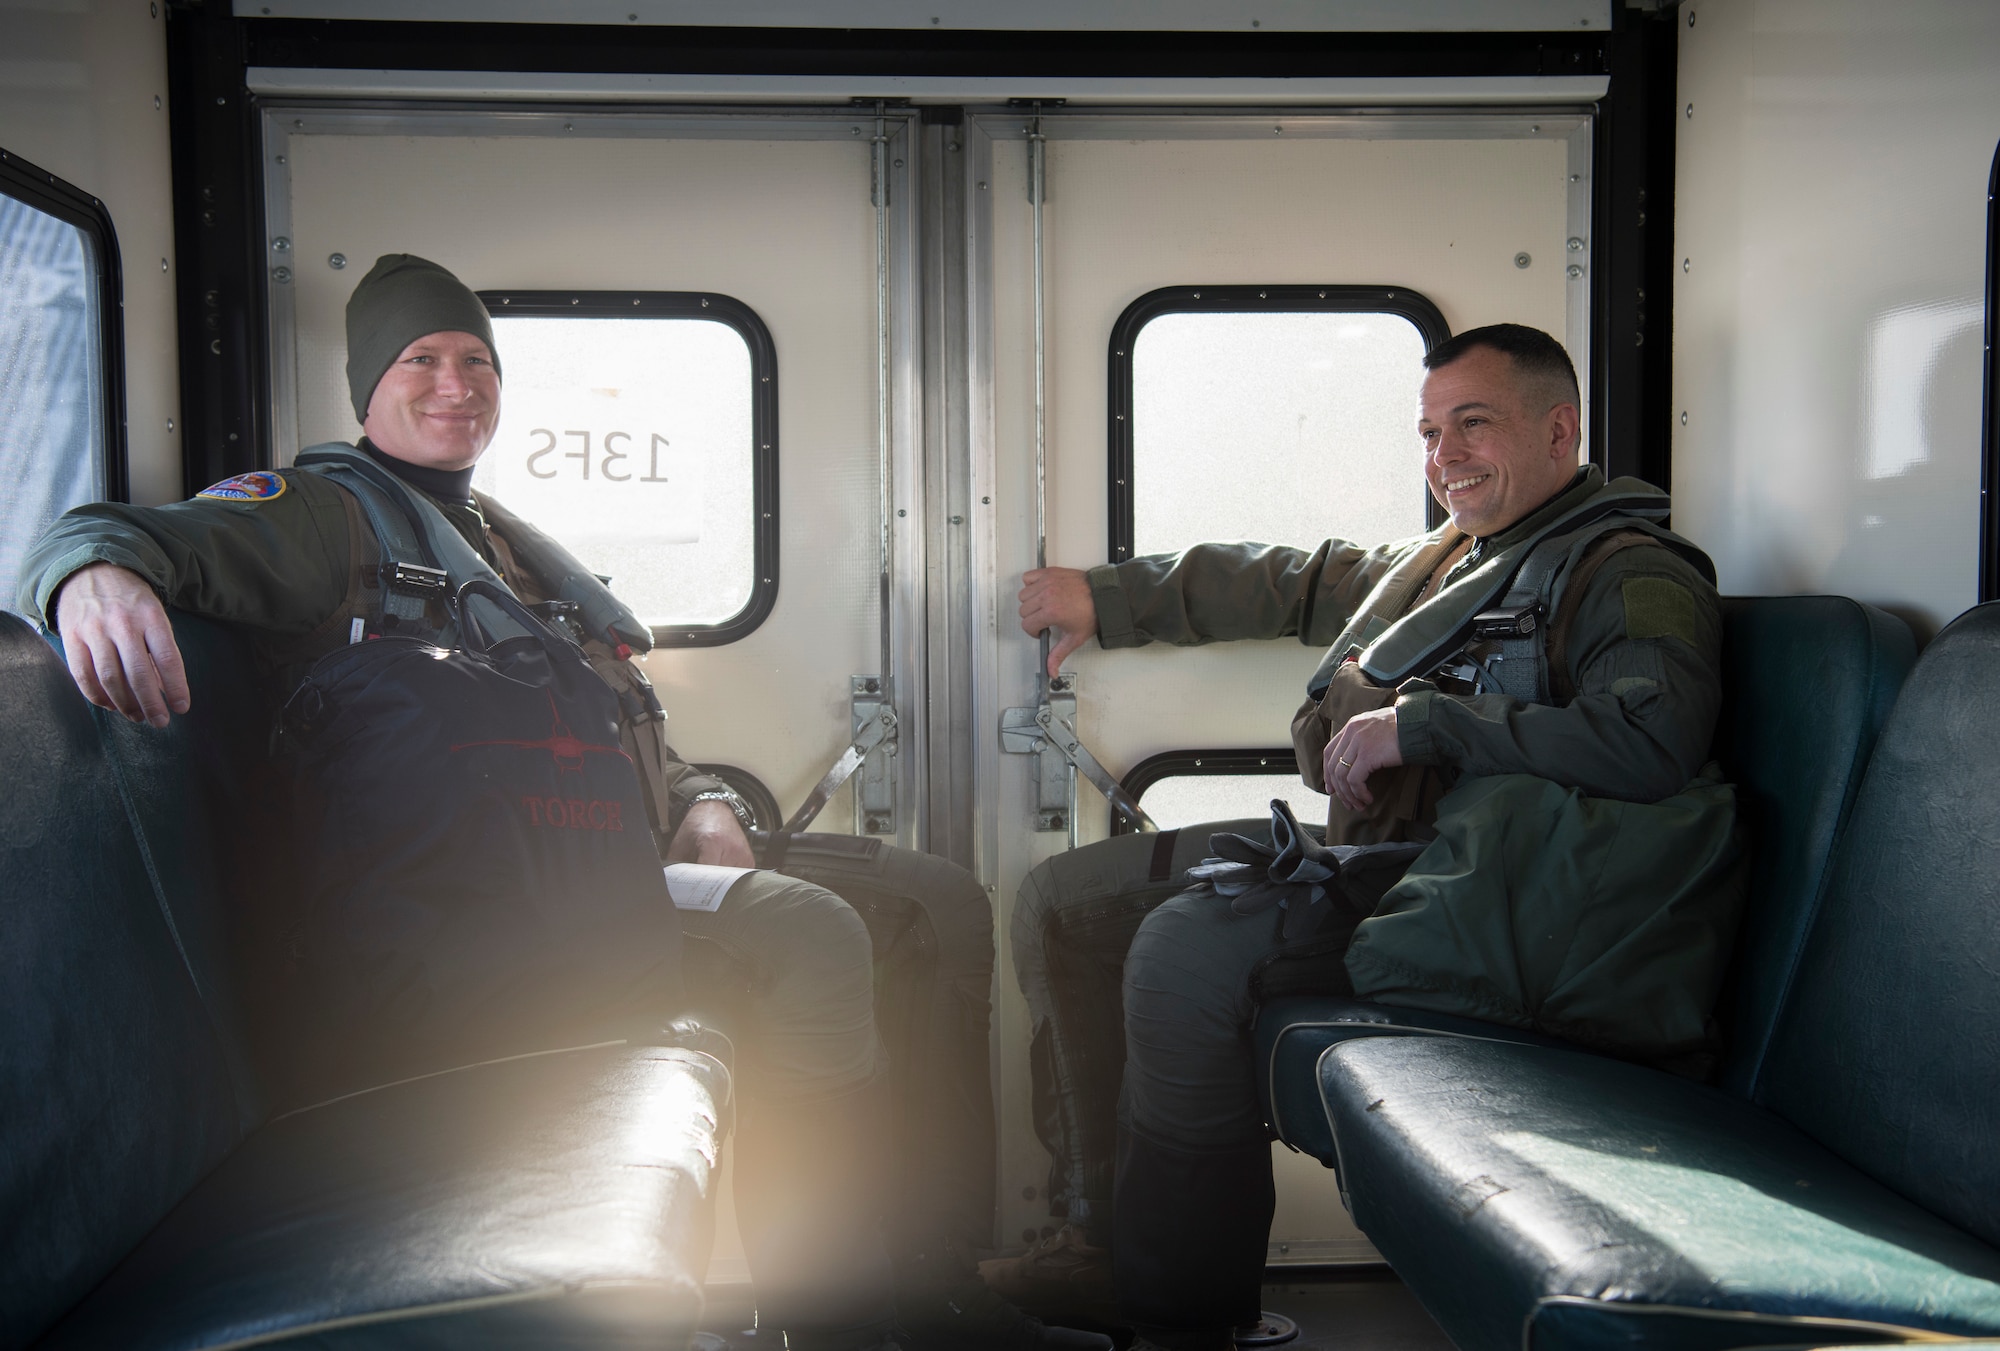 U.S. Air Force Col. Kristopher Struve, left, the 35th Fighter Wing commander, and Chief Master Sgt. John Alsvig, right, the 35th FW command chief, ride in a truck out to a F-16 Fighting Falcon at Misawa Air Base, Japan, Dec. 28, 1018. Struve, a seasoned F-16 Fighting Falcon pilot with more than 2,500 flying hours, gave Alsvig a familiarization flight. Both Struve and Alsvig have been stationed at Misawa AB three times over their careers. (U.S. Air Force photo by Staff Sgt. B.A. Chase)